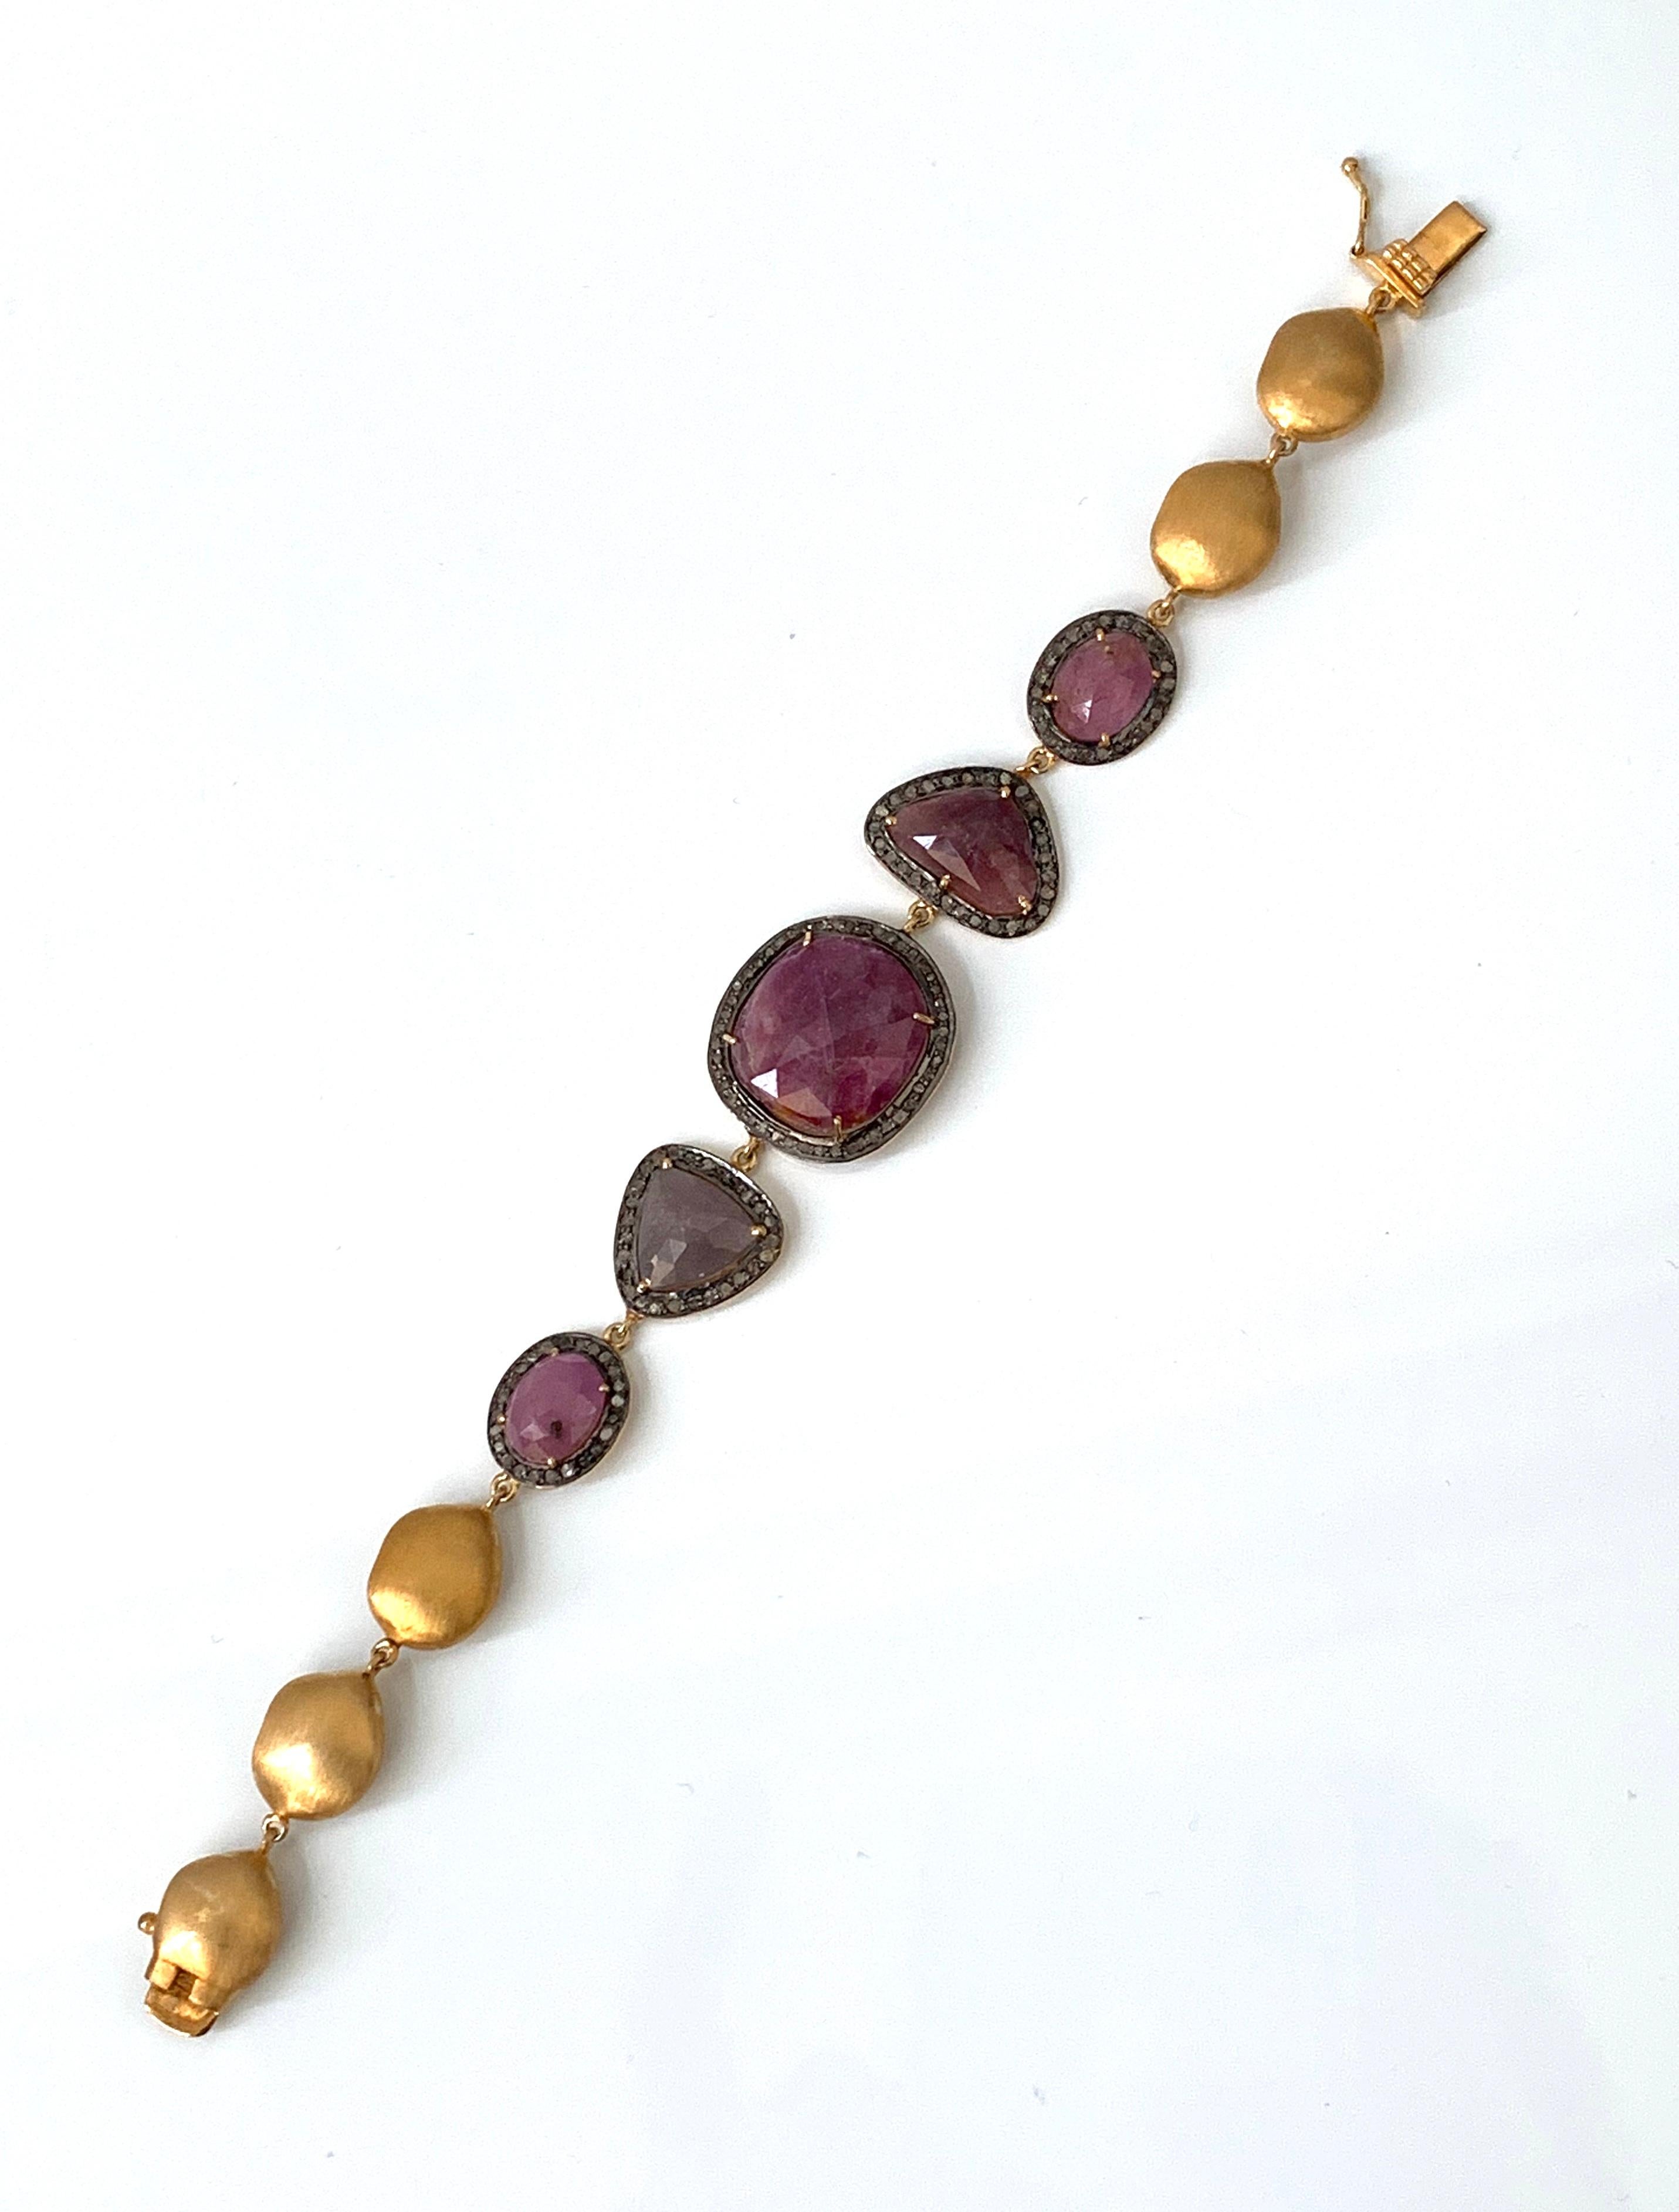 Beautiful One of a Kind Natural Unheated Corundum with Rough Diamond Link Bracelet. The corundums are all natural and unheated in color of pale ruby and pale sapphire, adorned with rough diamond, and link with 18k gold plated silver nugget in brush